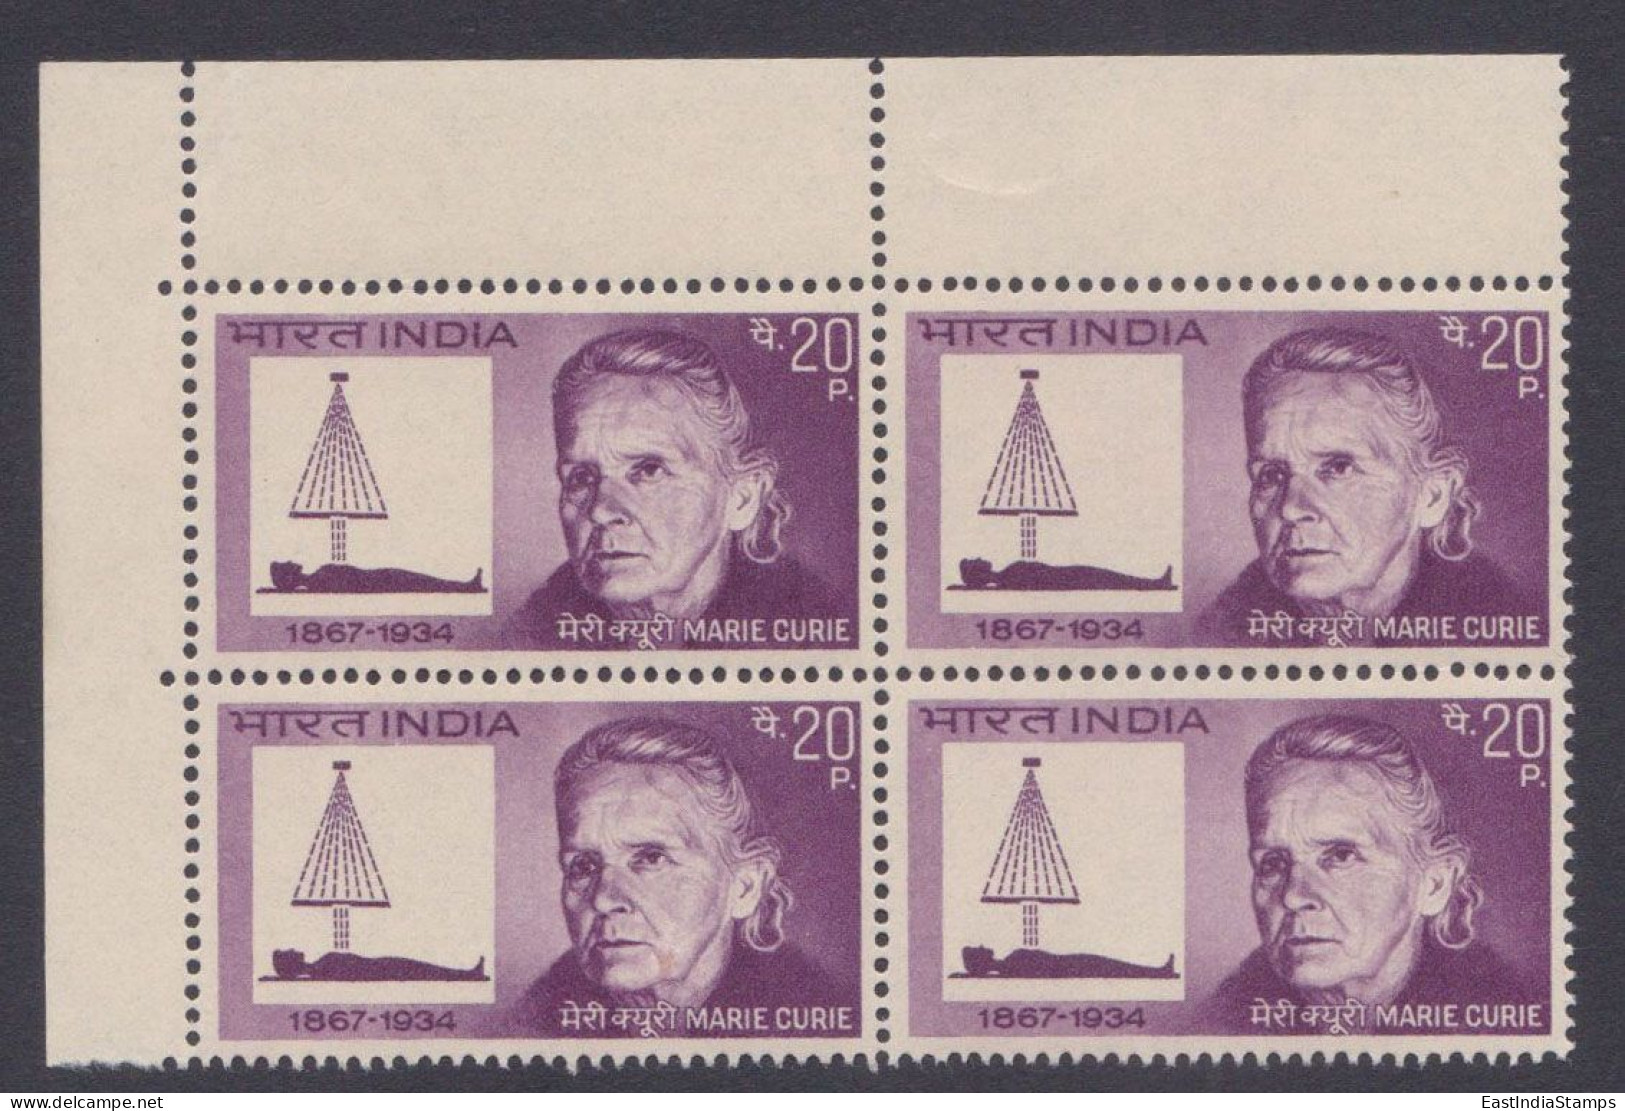 Inde India 1968 MNH Marie Curie, Polish French Chemist, Physicist, Nobel Prize Winner, Science, Scientist, Physics Block - Ongebruikt